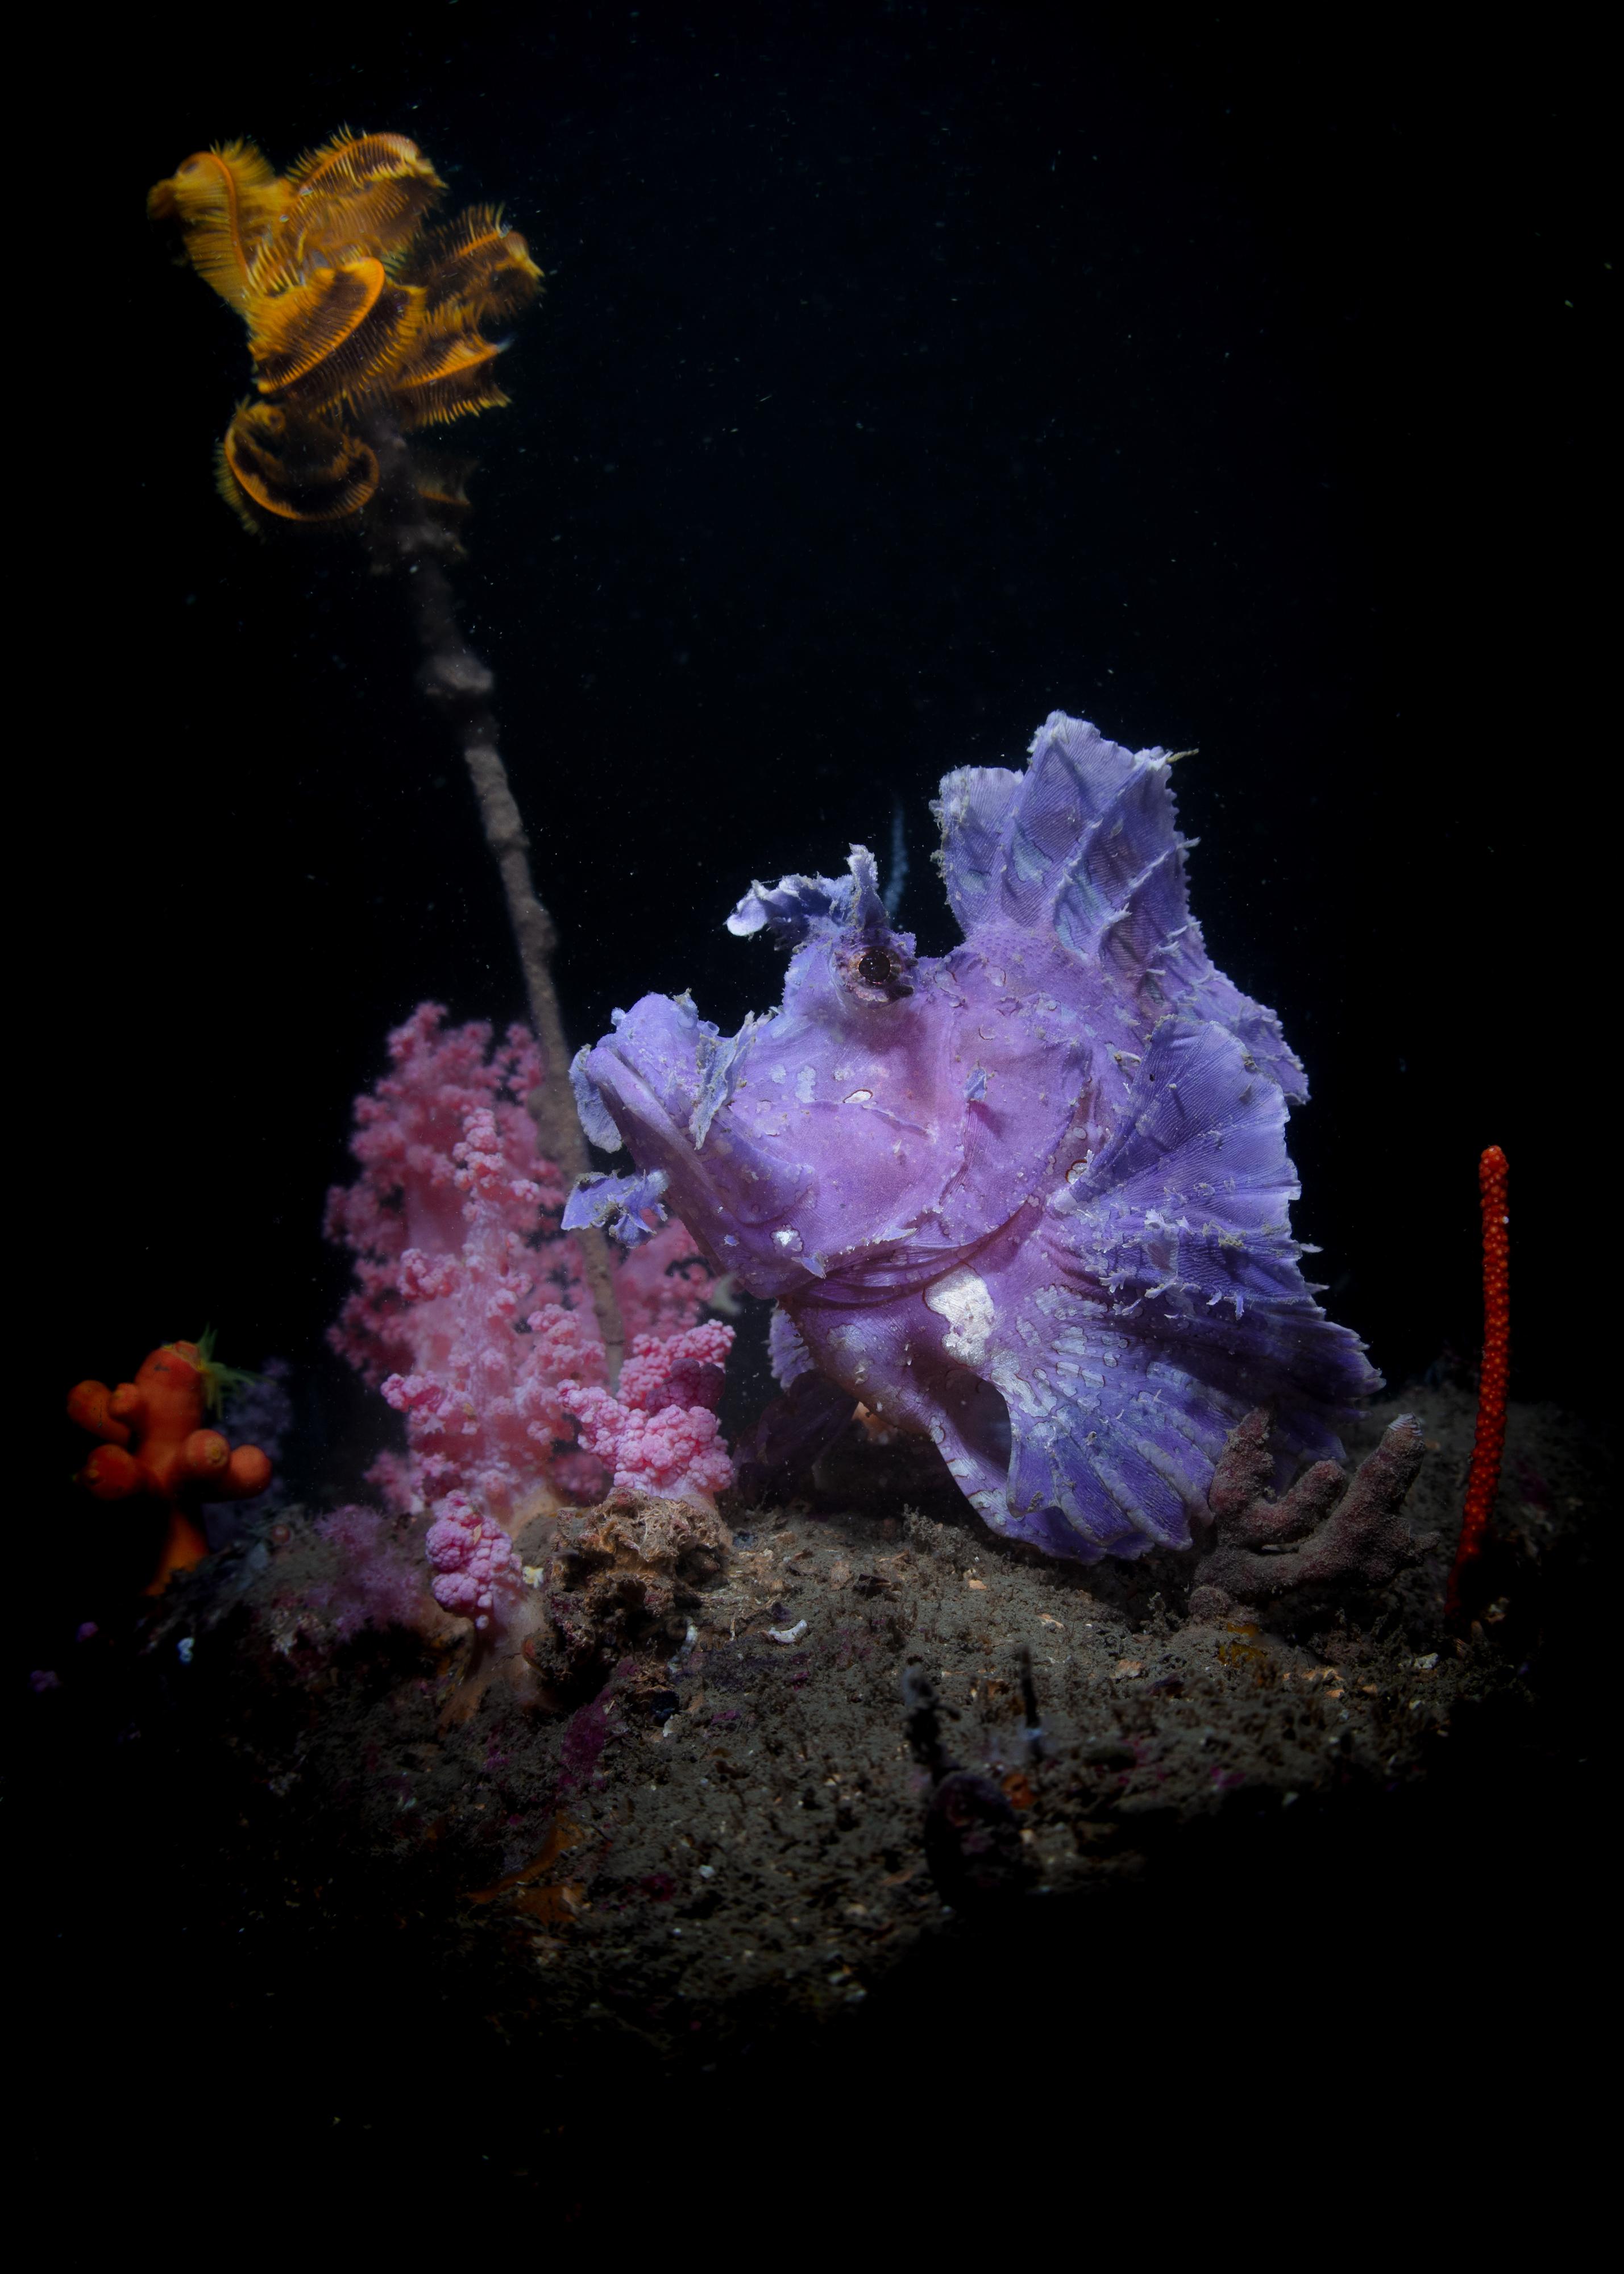 The Hong Kong Underwater Photo and Video Competition 2023, jointly organised by the Agriculture, Fisheries and Conservation Department and the Hong Kong China Underwater Association, concluded successfully. Picture shows "Purple Rhinopias", Biodiversity Award, taken by Henry Li off East Ninepin Island.